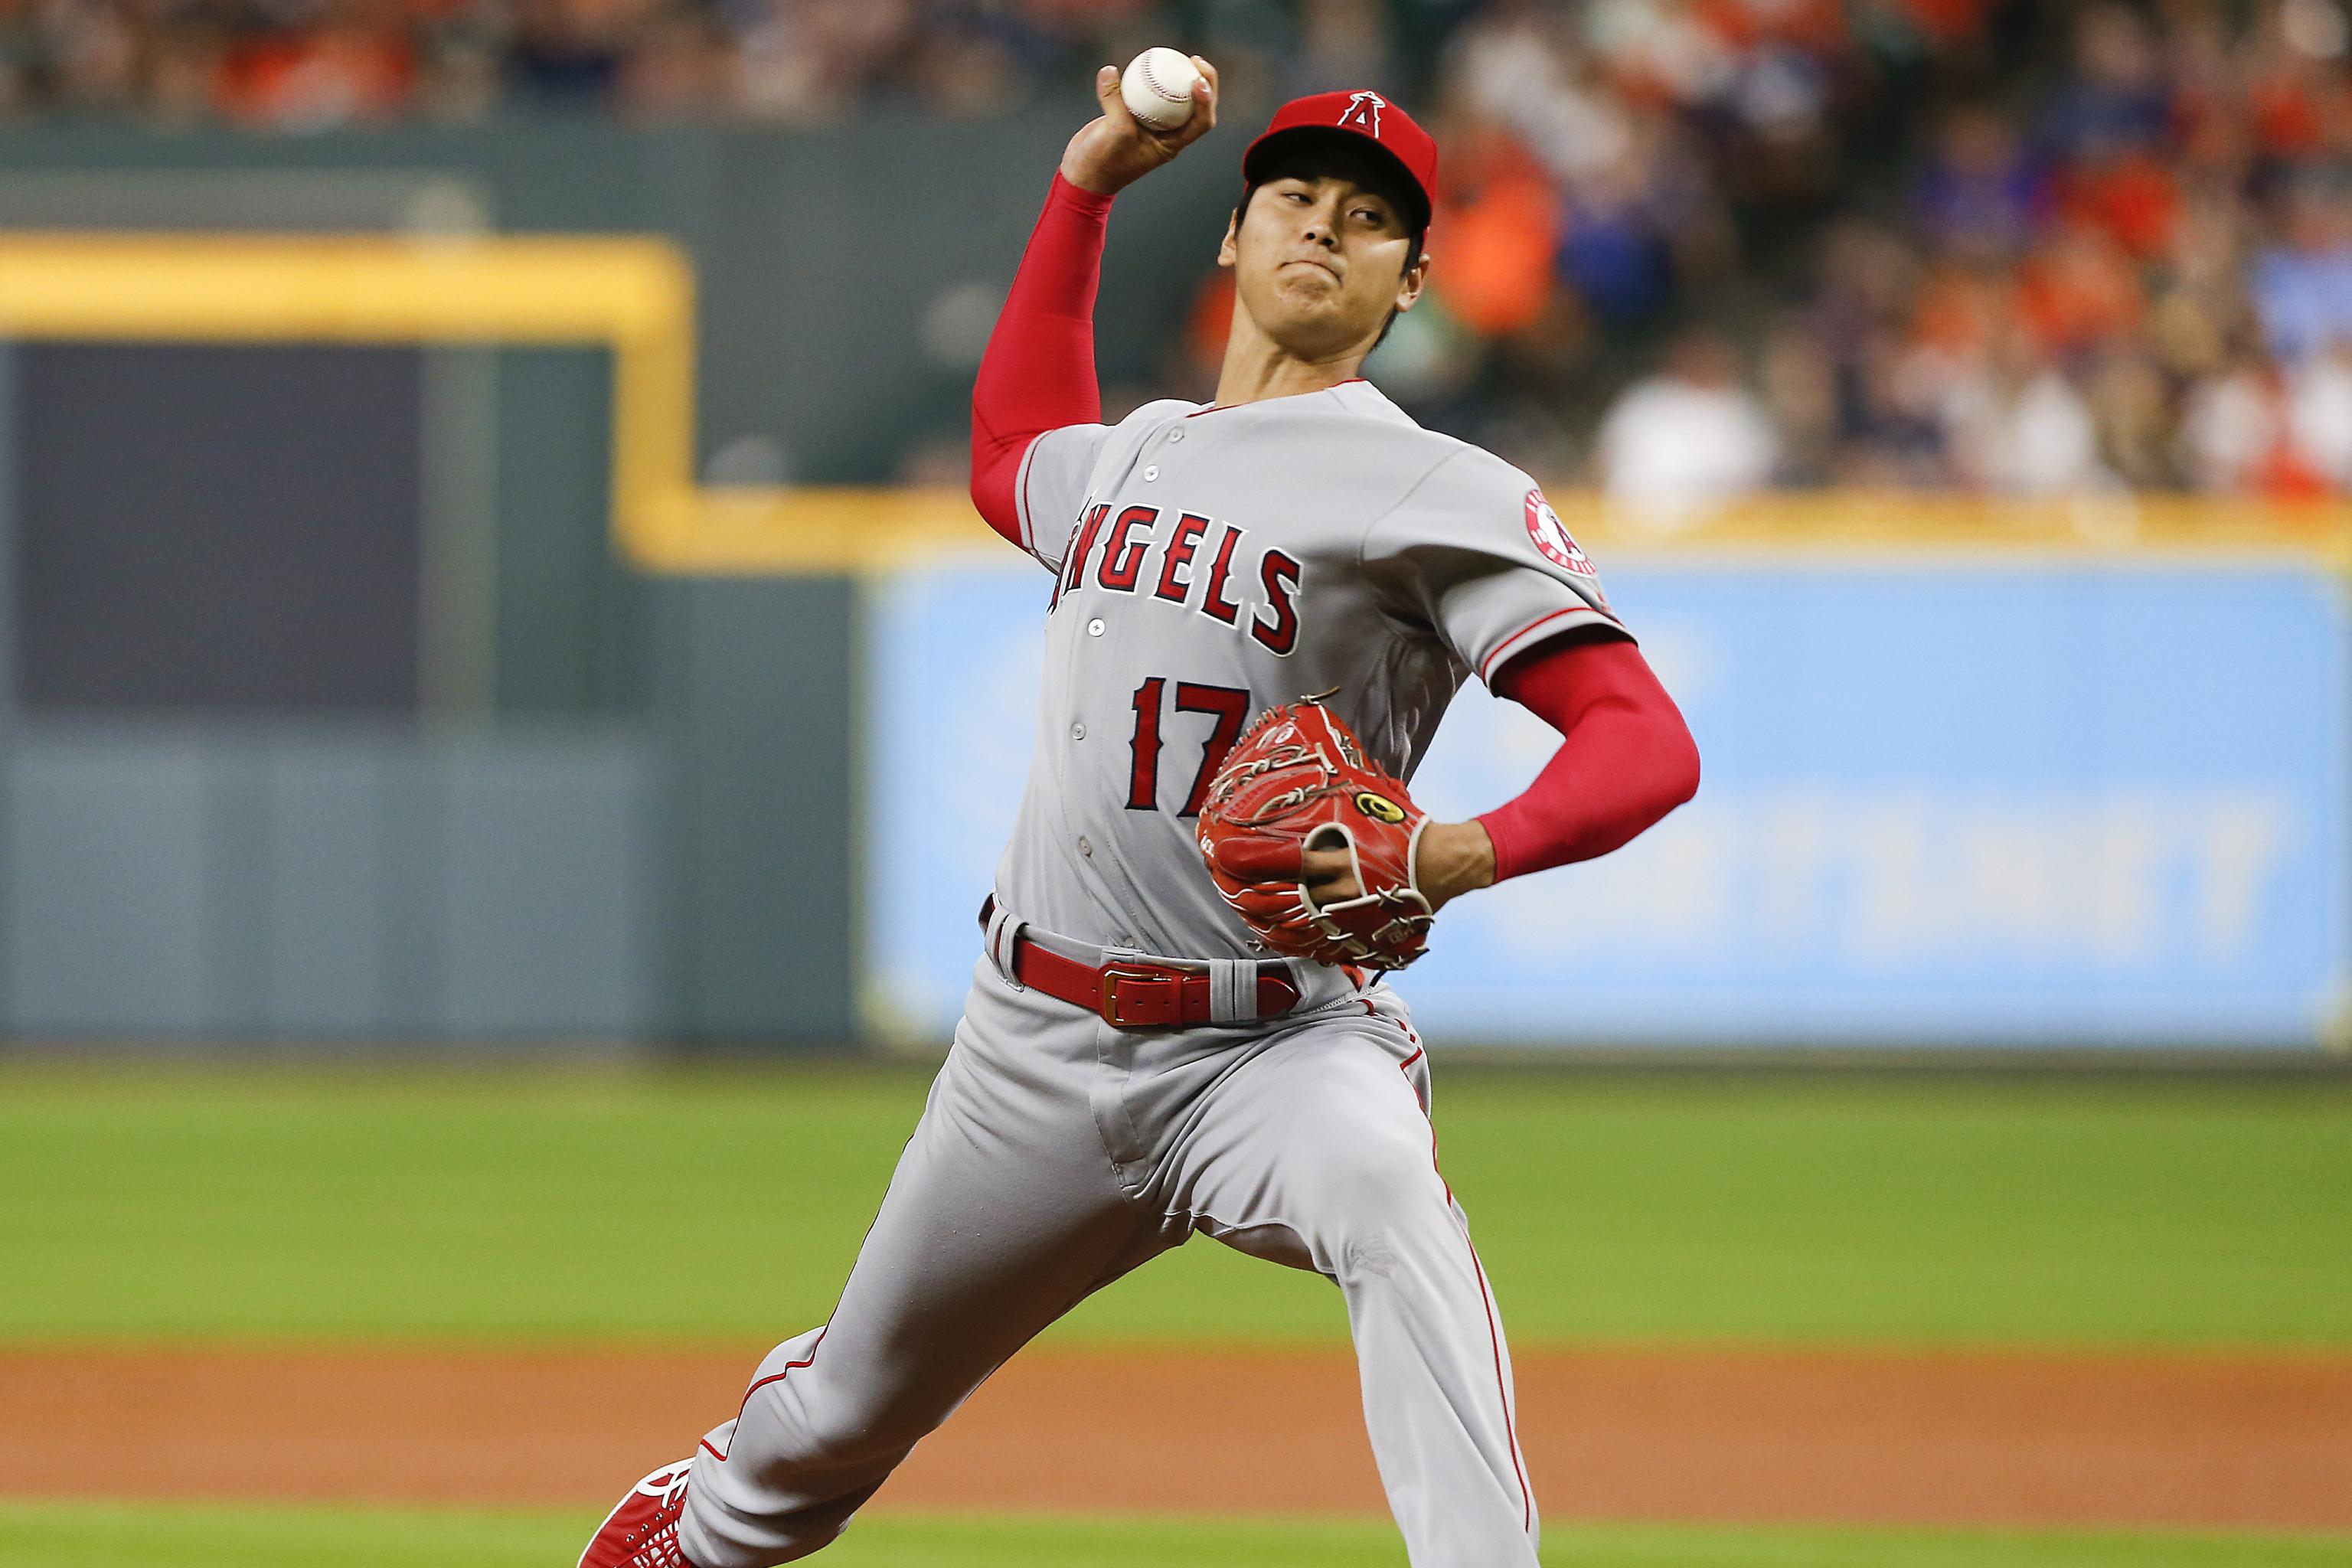 Shohei Ohtani ties Babe Ruth's mark in his first 674 major league